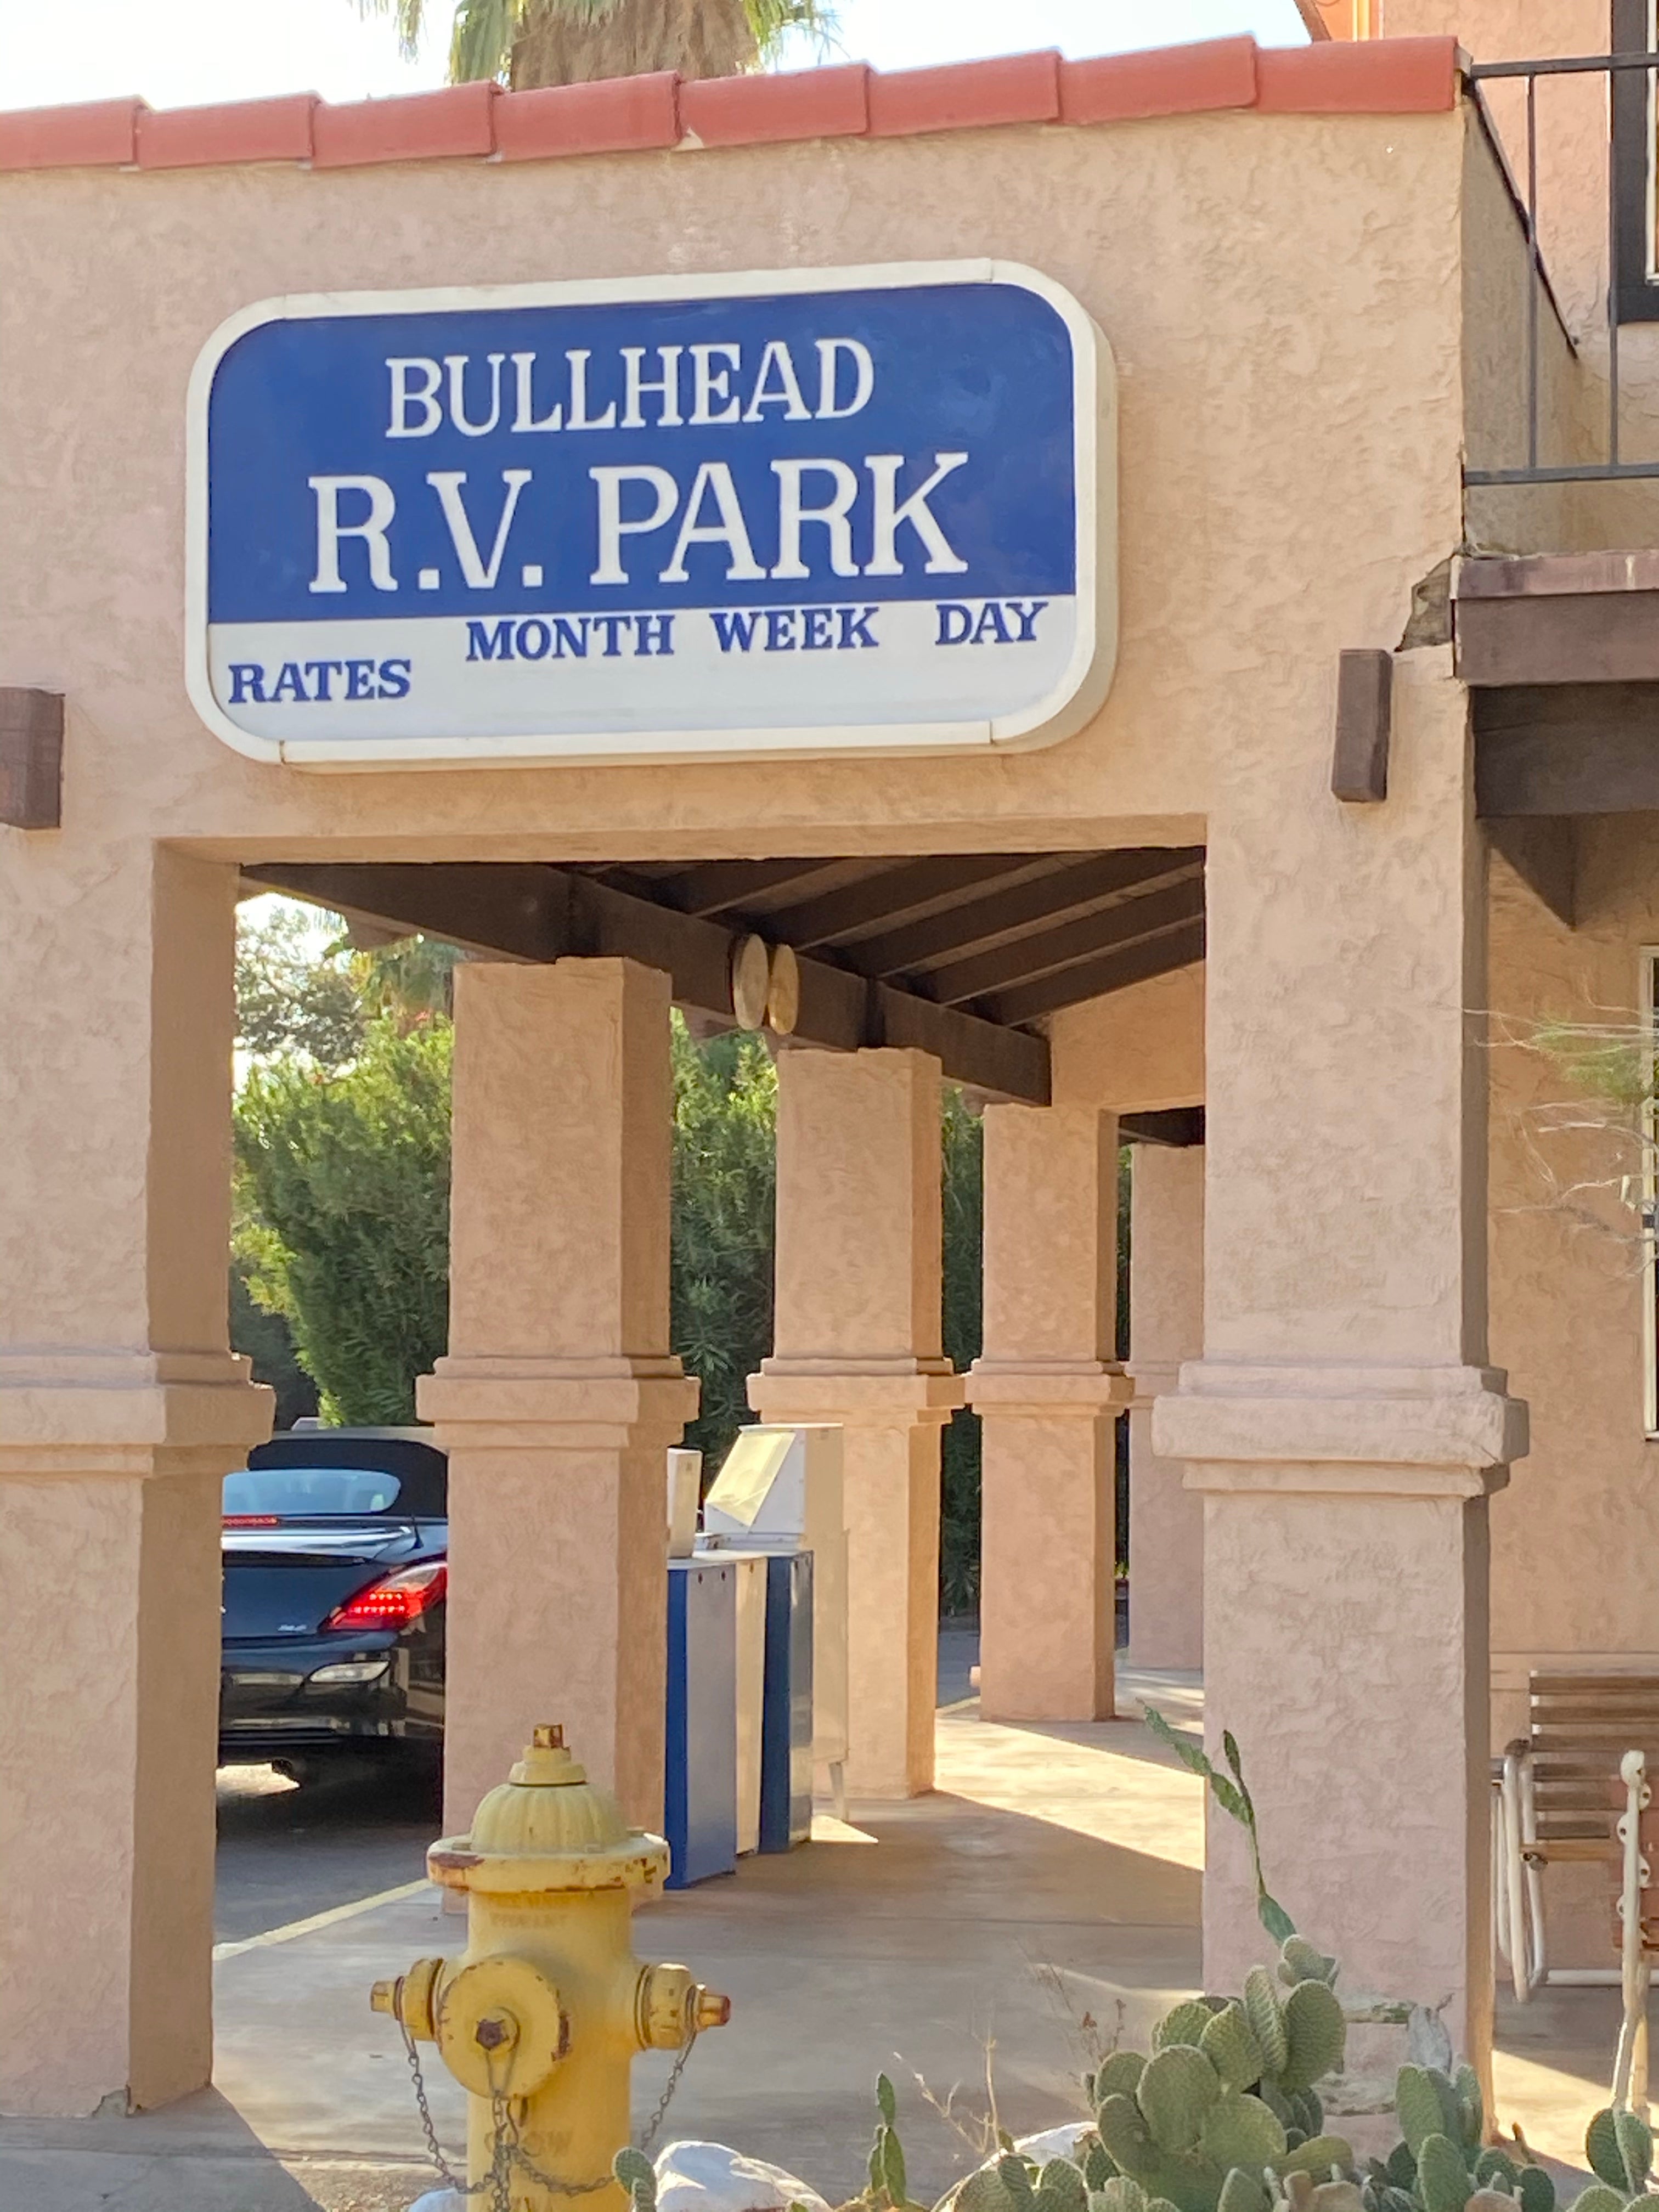 Camper submitted image from Bullhead RV Park - 1